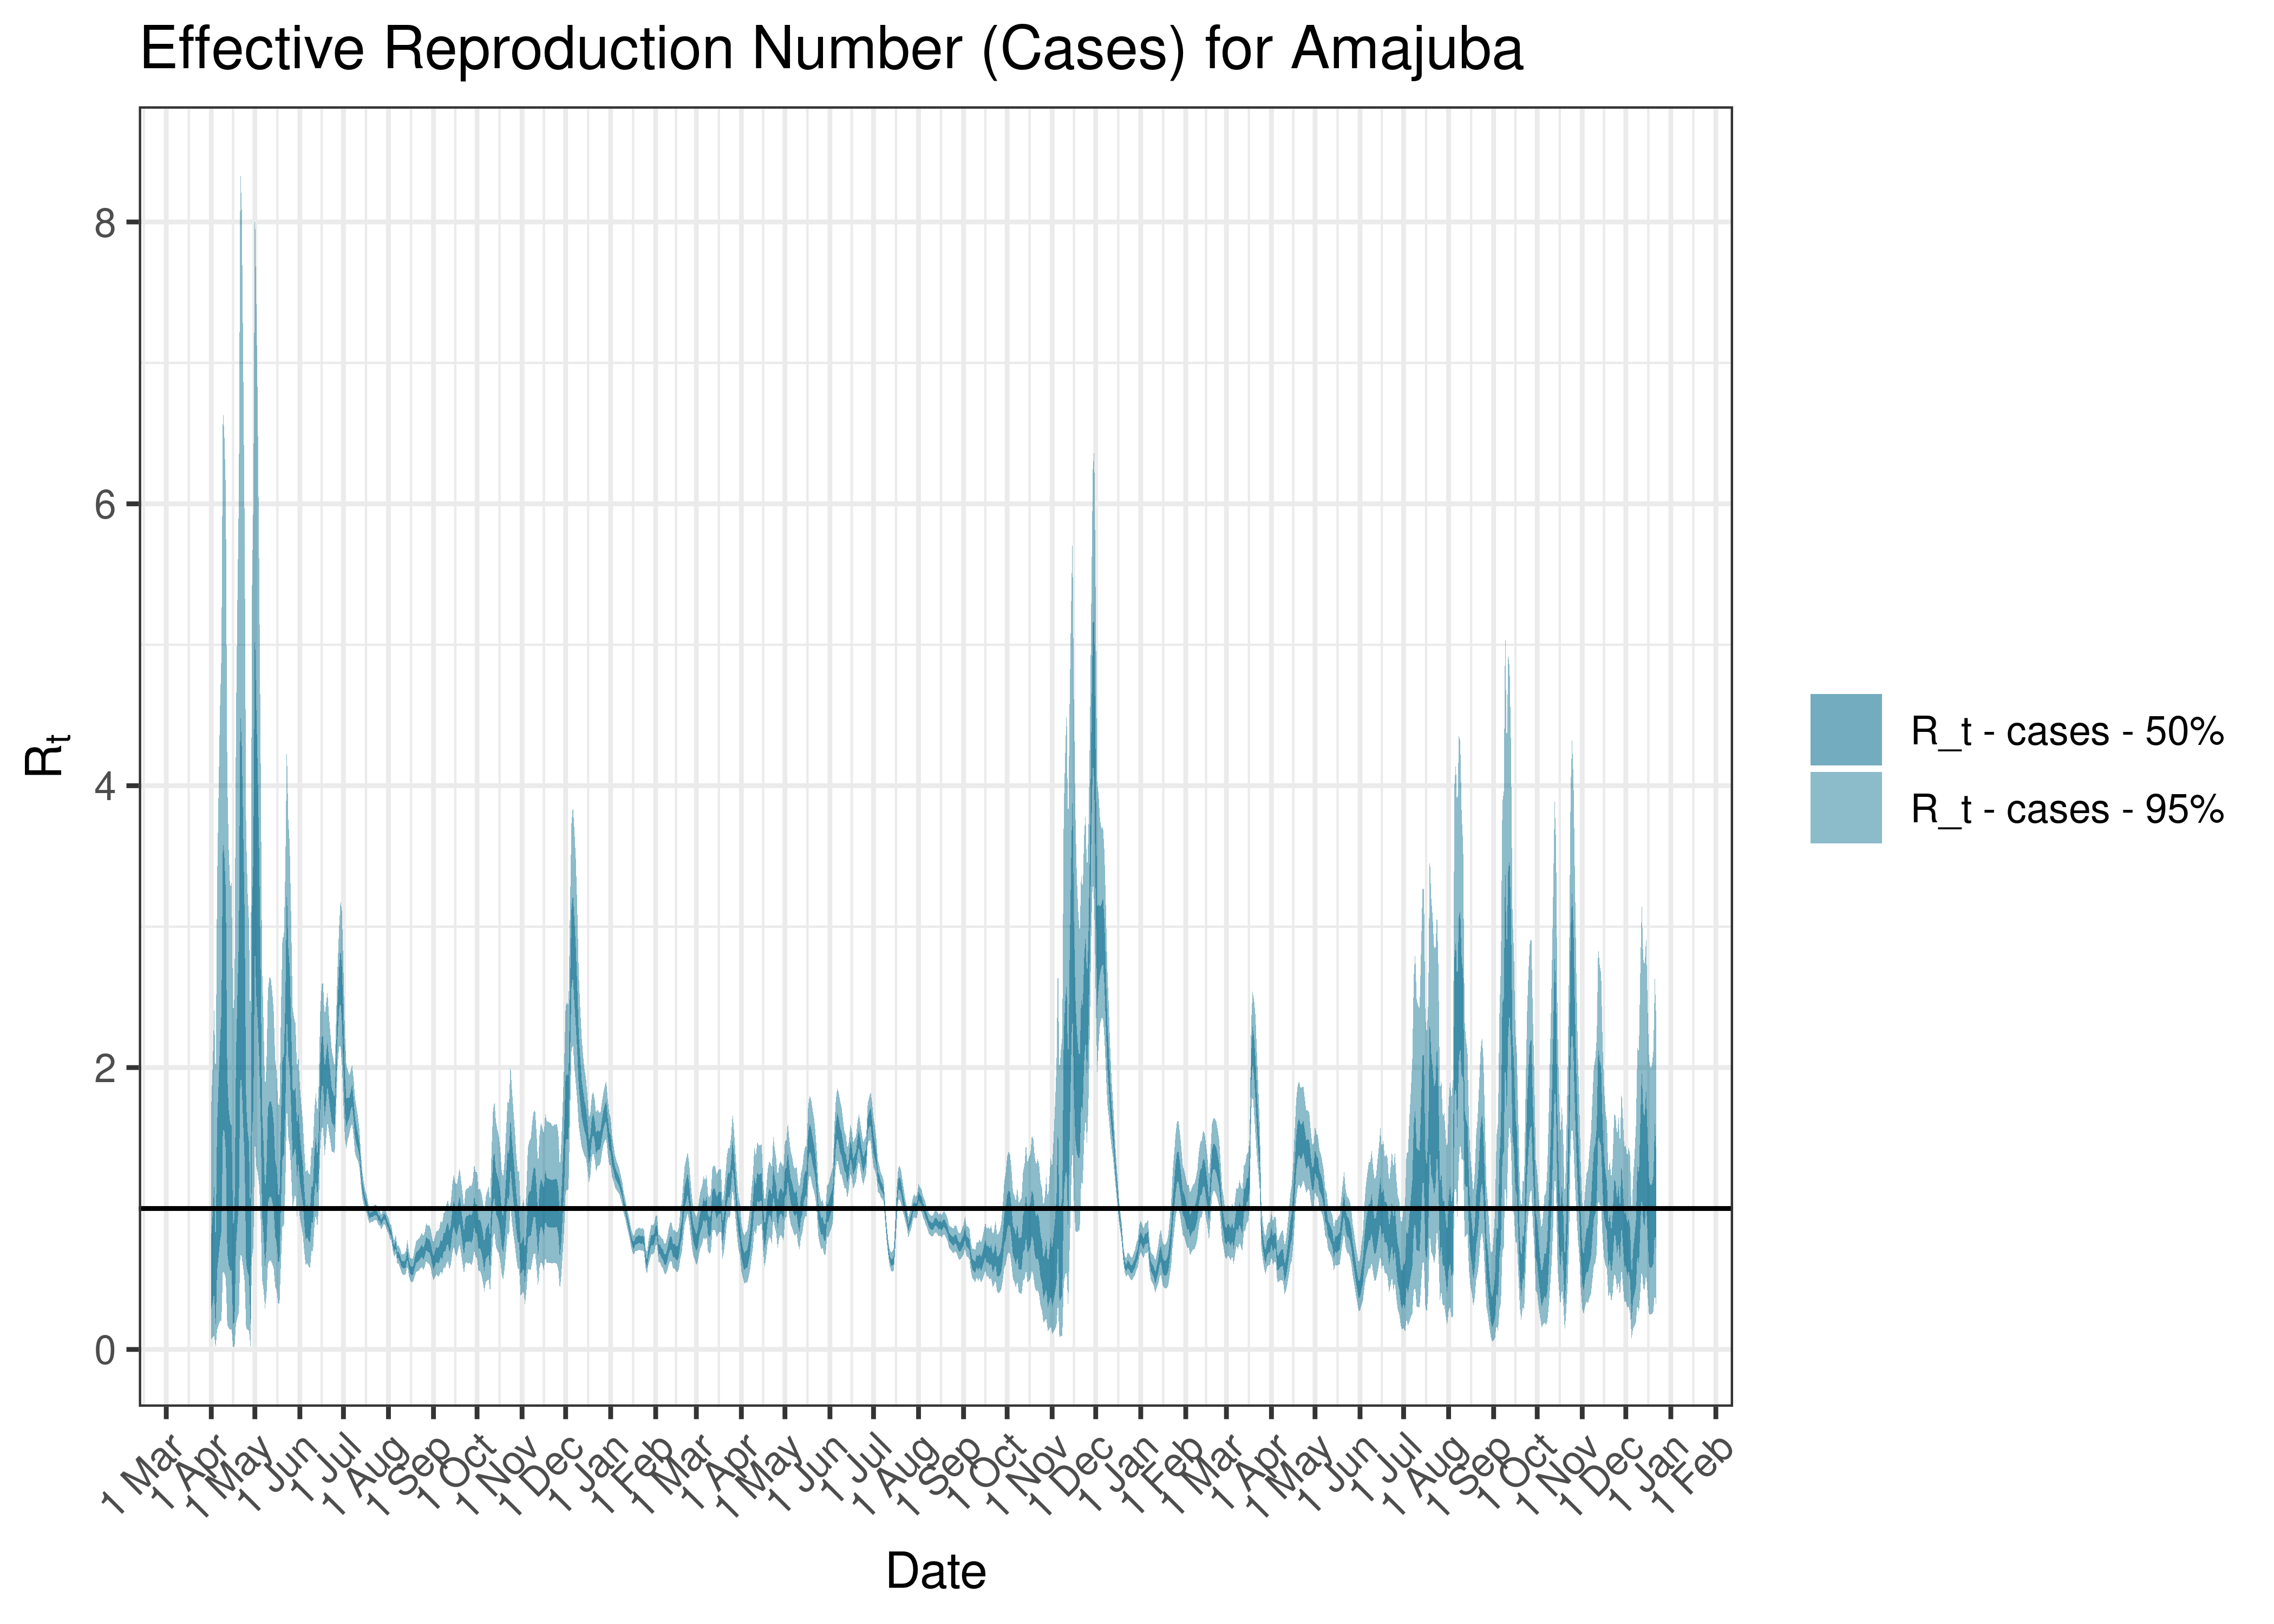 Estimated Effective Reproduction Number Based on Cases for Amajuba since 1 April 2020